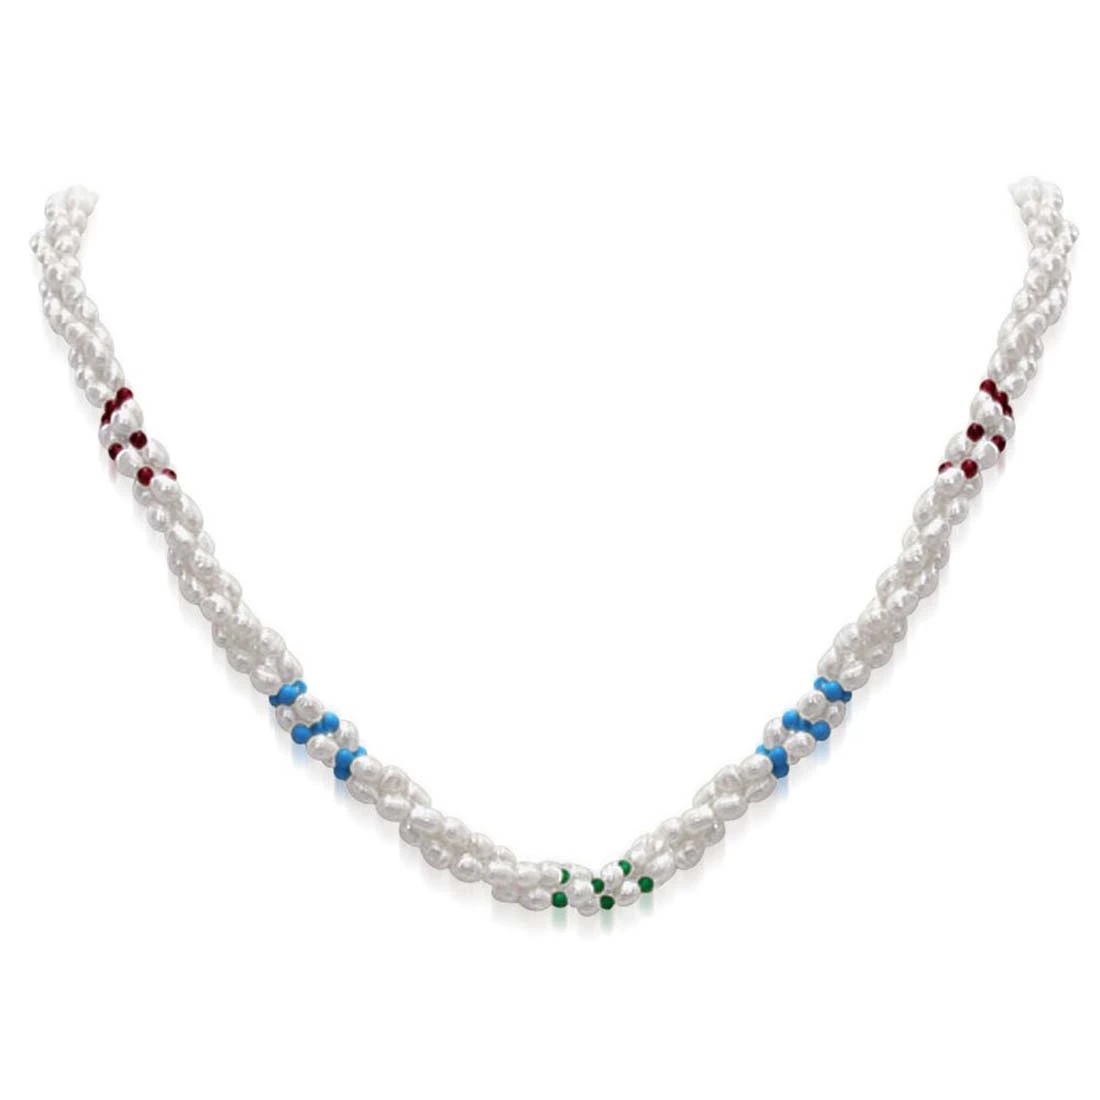 Vanilla Ice - 3 Line Twisted Real Pearl, Turquoise, Garnet & Green Onyx Beads Necklace for Women (SN304)